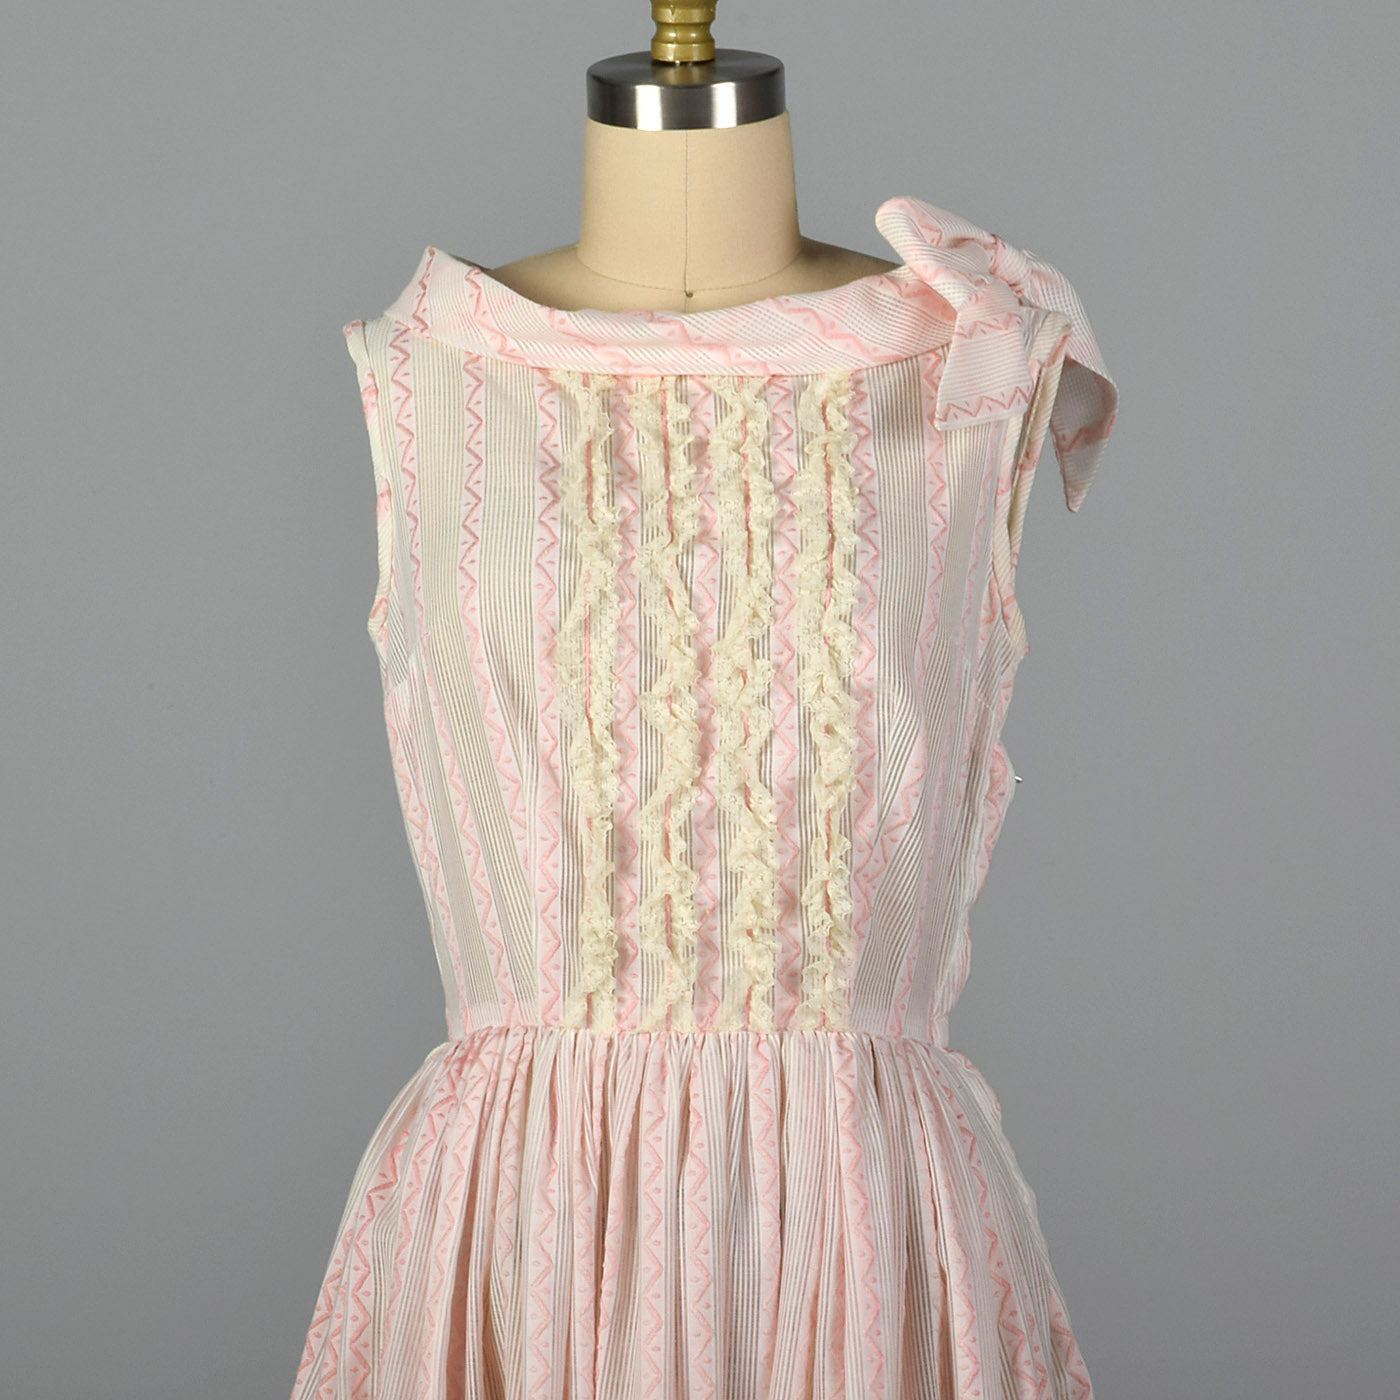 1950s Pink and White Sheer Day Dress